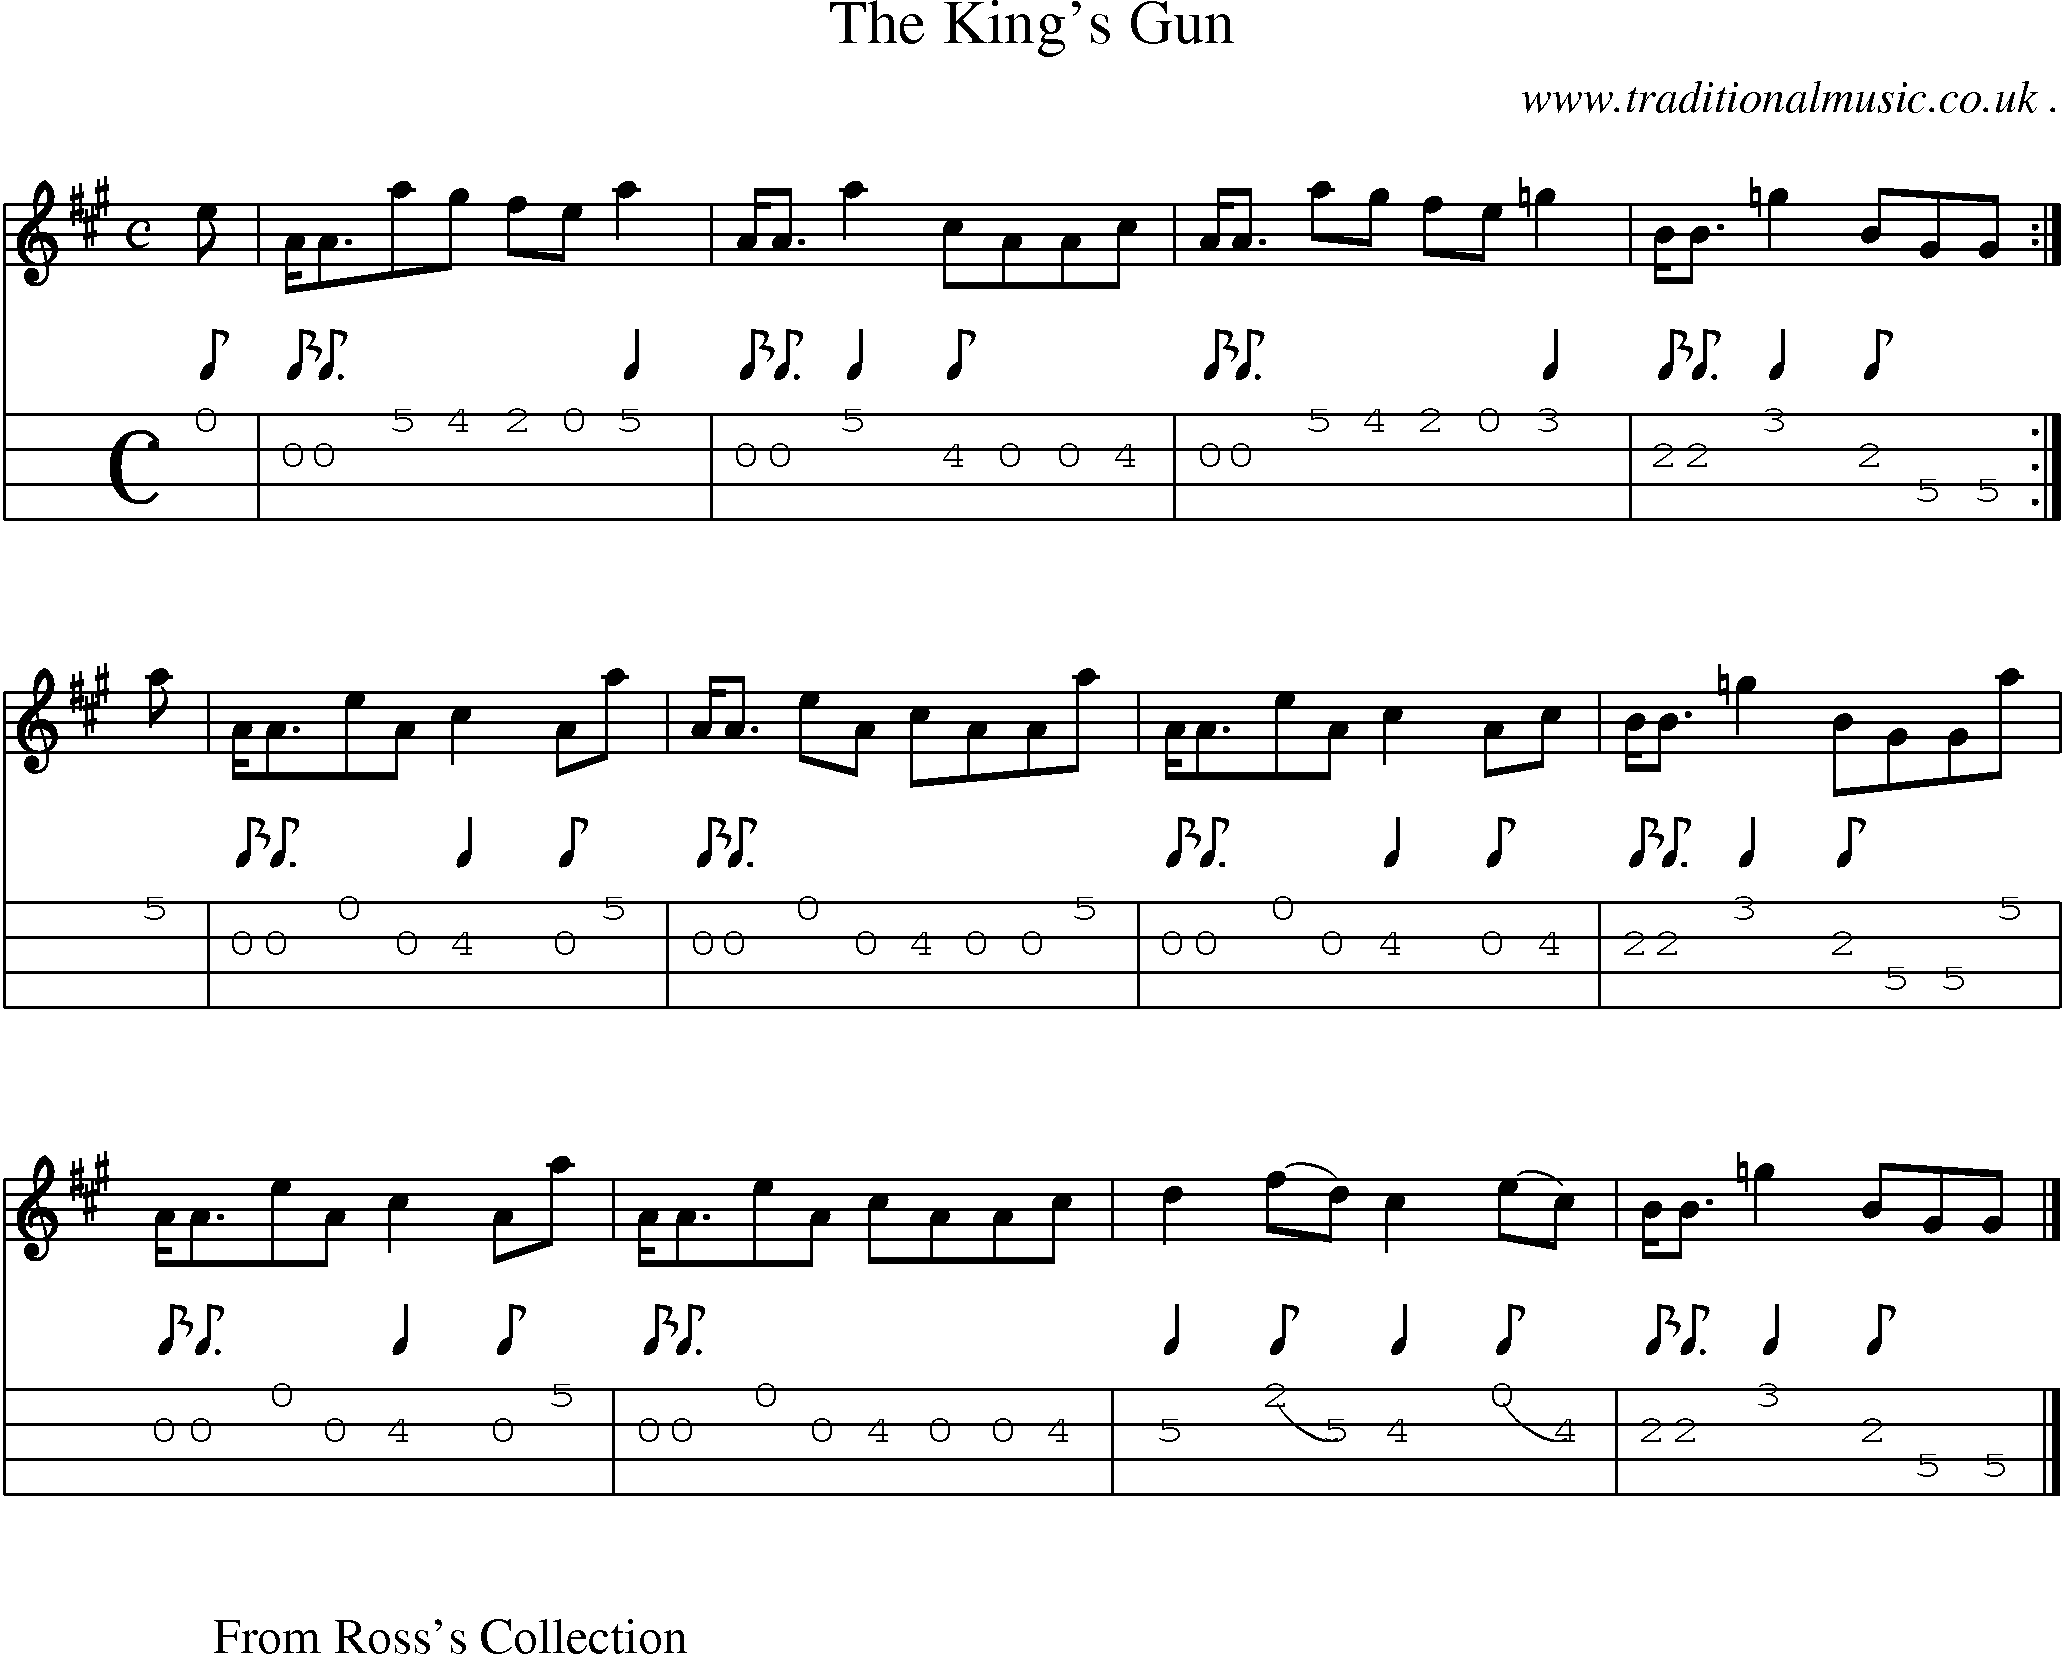 Sheet-music  score, Chords and Mandolin Tabs for The Kings Gun